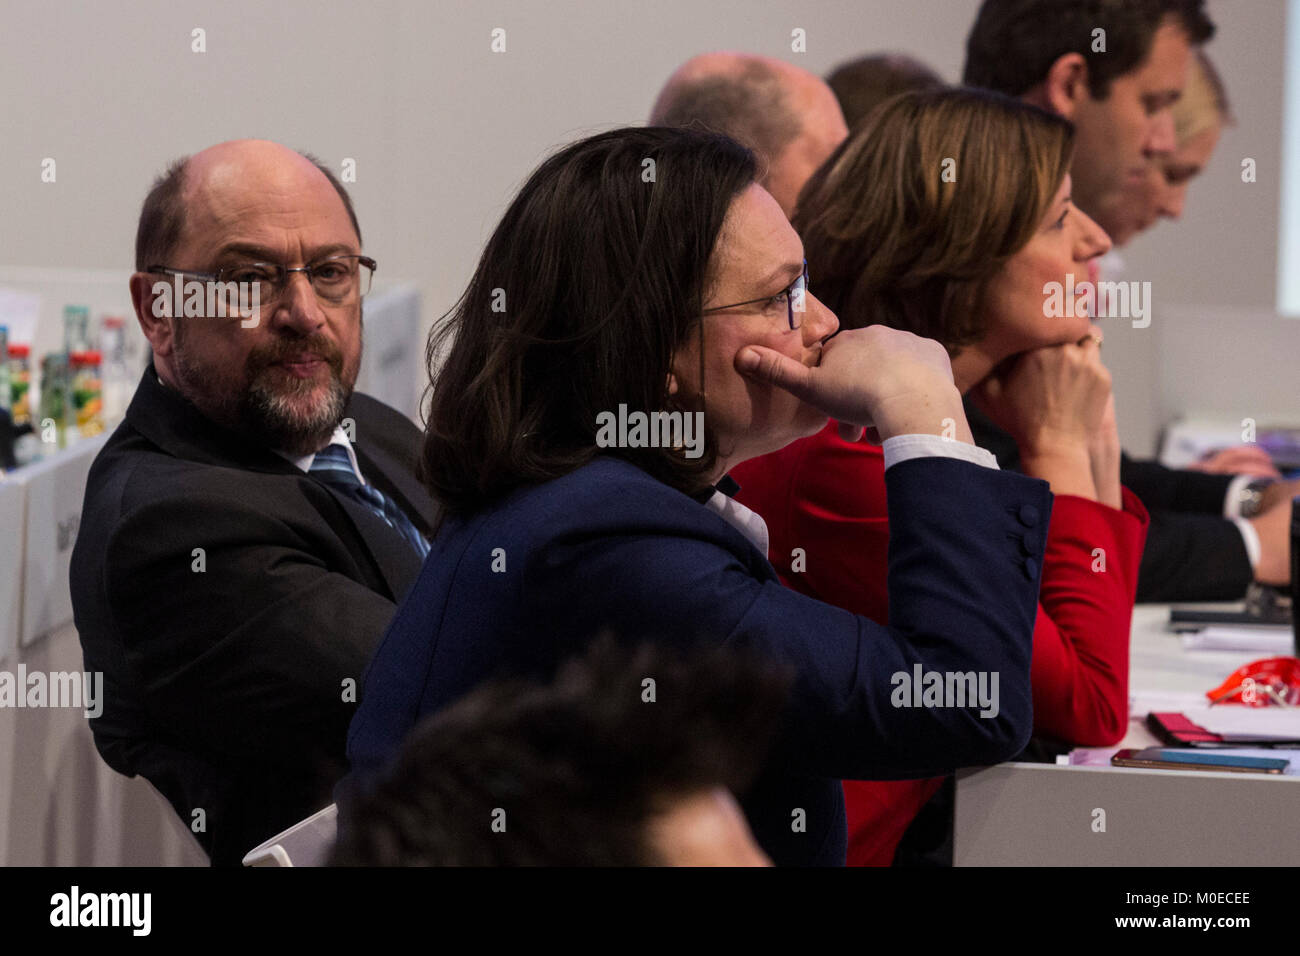 Bonn, Germany. 21 January 2018. L-R: Martin Schulz, Andrea Nahles, Malu Dreyer. SPD extraordinary party convention at World Conference Center Bonn to discuss and approve options to enter into a grand coalition with the CDU, Christian Democrats, before asking SPD members for approval. Photo: Bettina Strenske/Alamy Live News Stock Photo